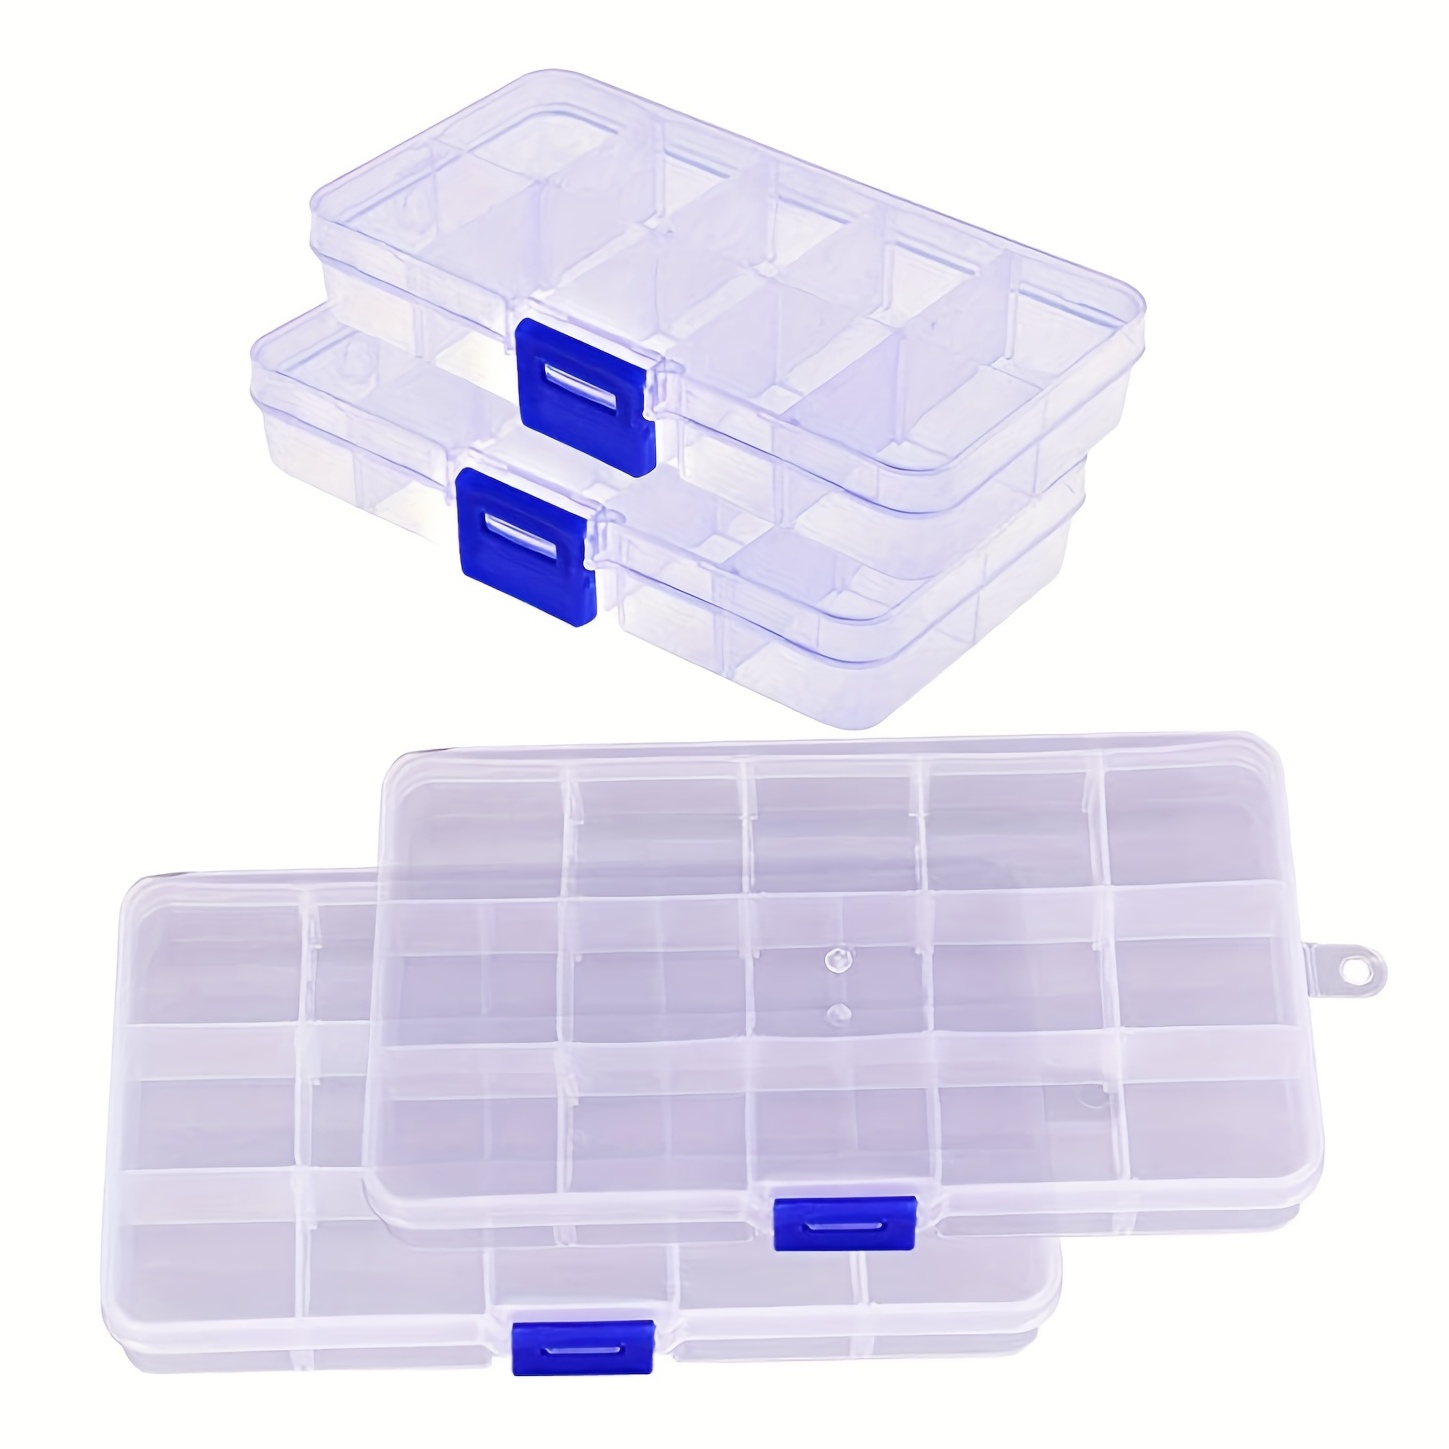 

4pcs Clear Plastic Storage Box, Bead Storage Container Box, With 10/15 Grids, Portable Finishing Organizer, Perfect For Organizing Jewelry, Rings, Small Parts, Mini Items, Etc